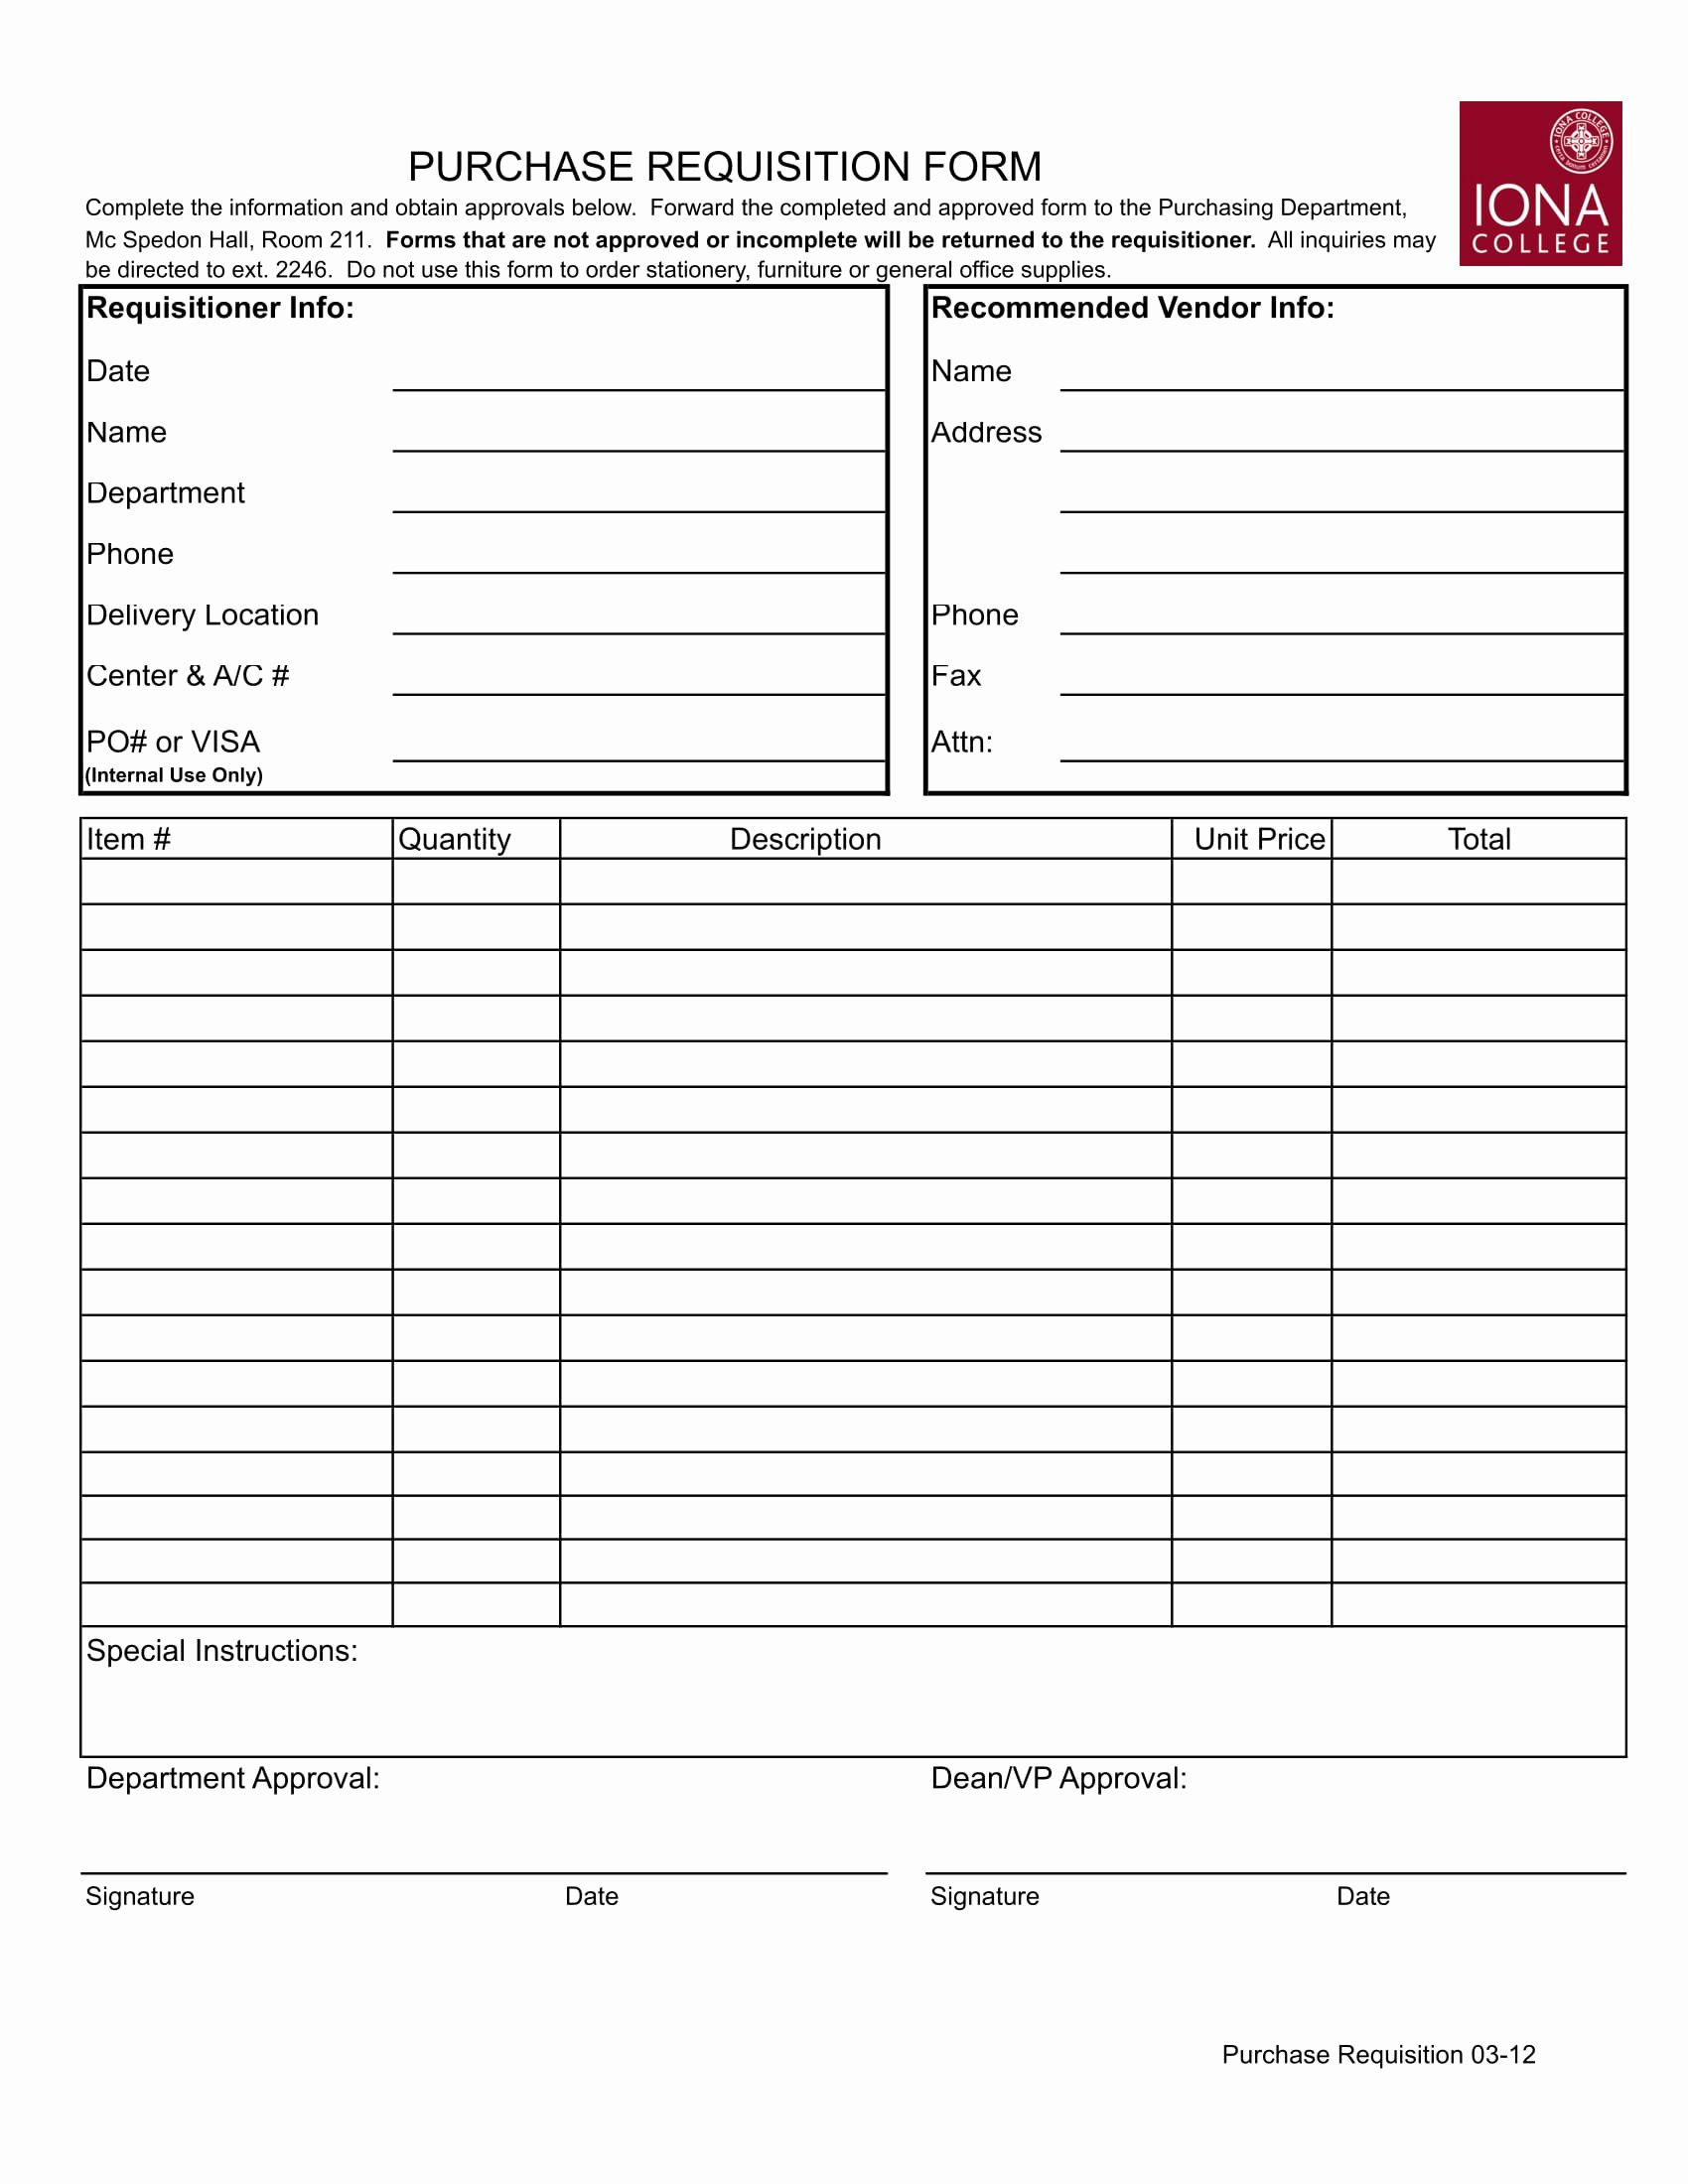 Purchase Request form Template New 4 Purchase Request forms Pdf